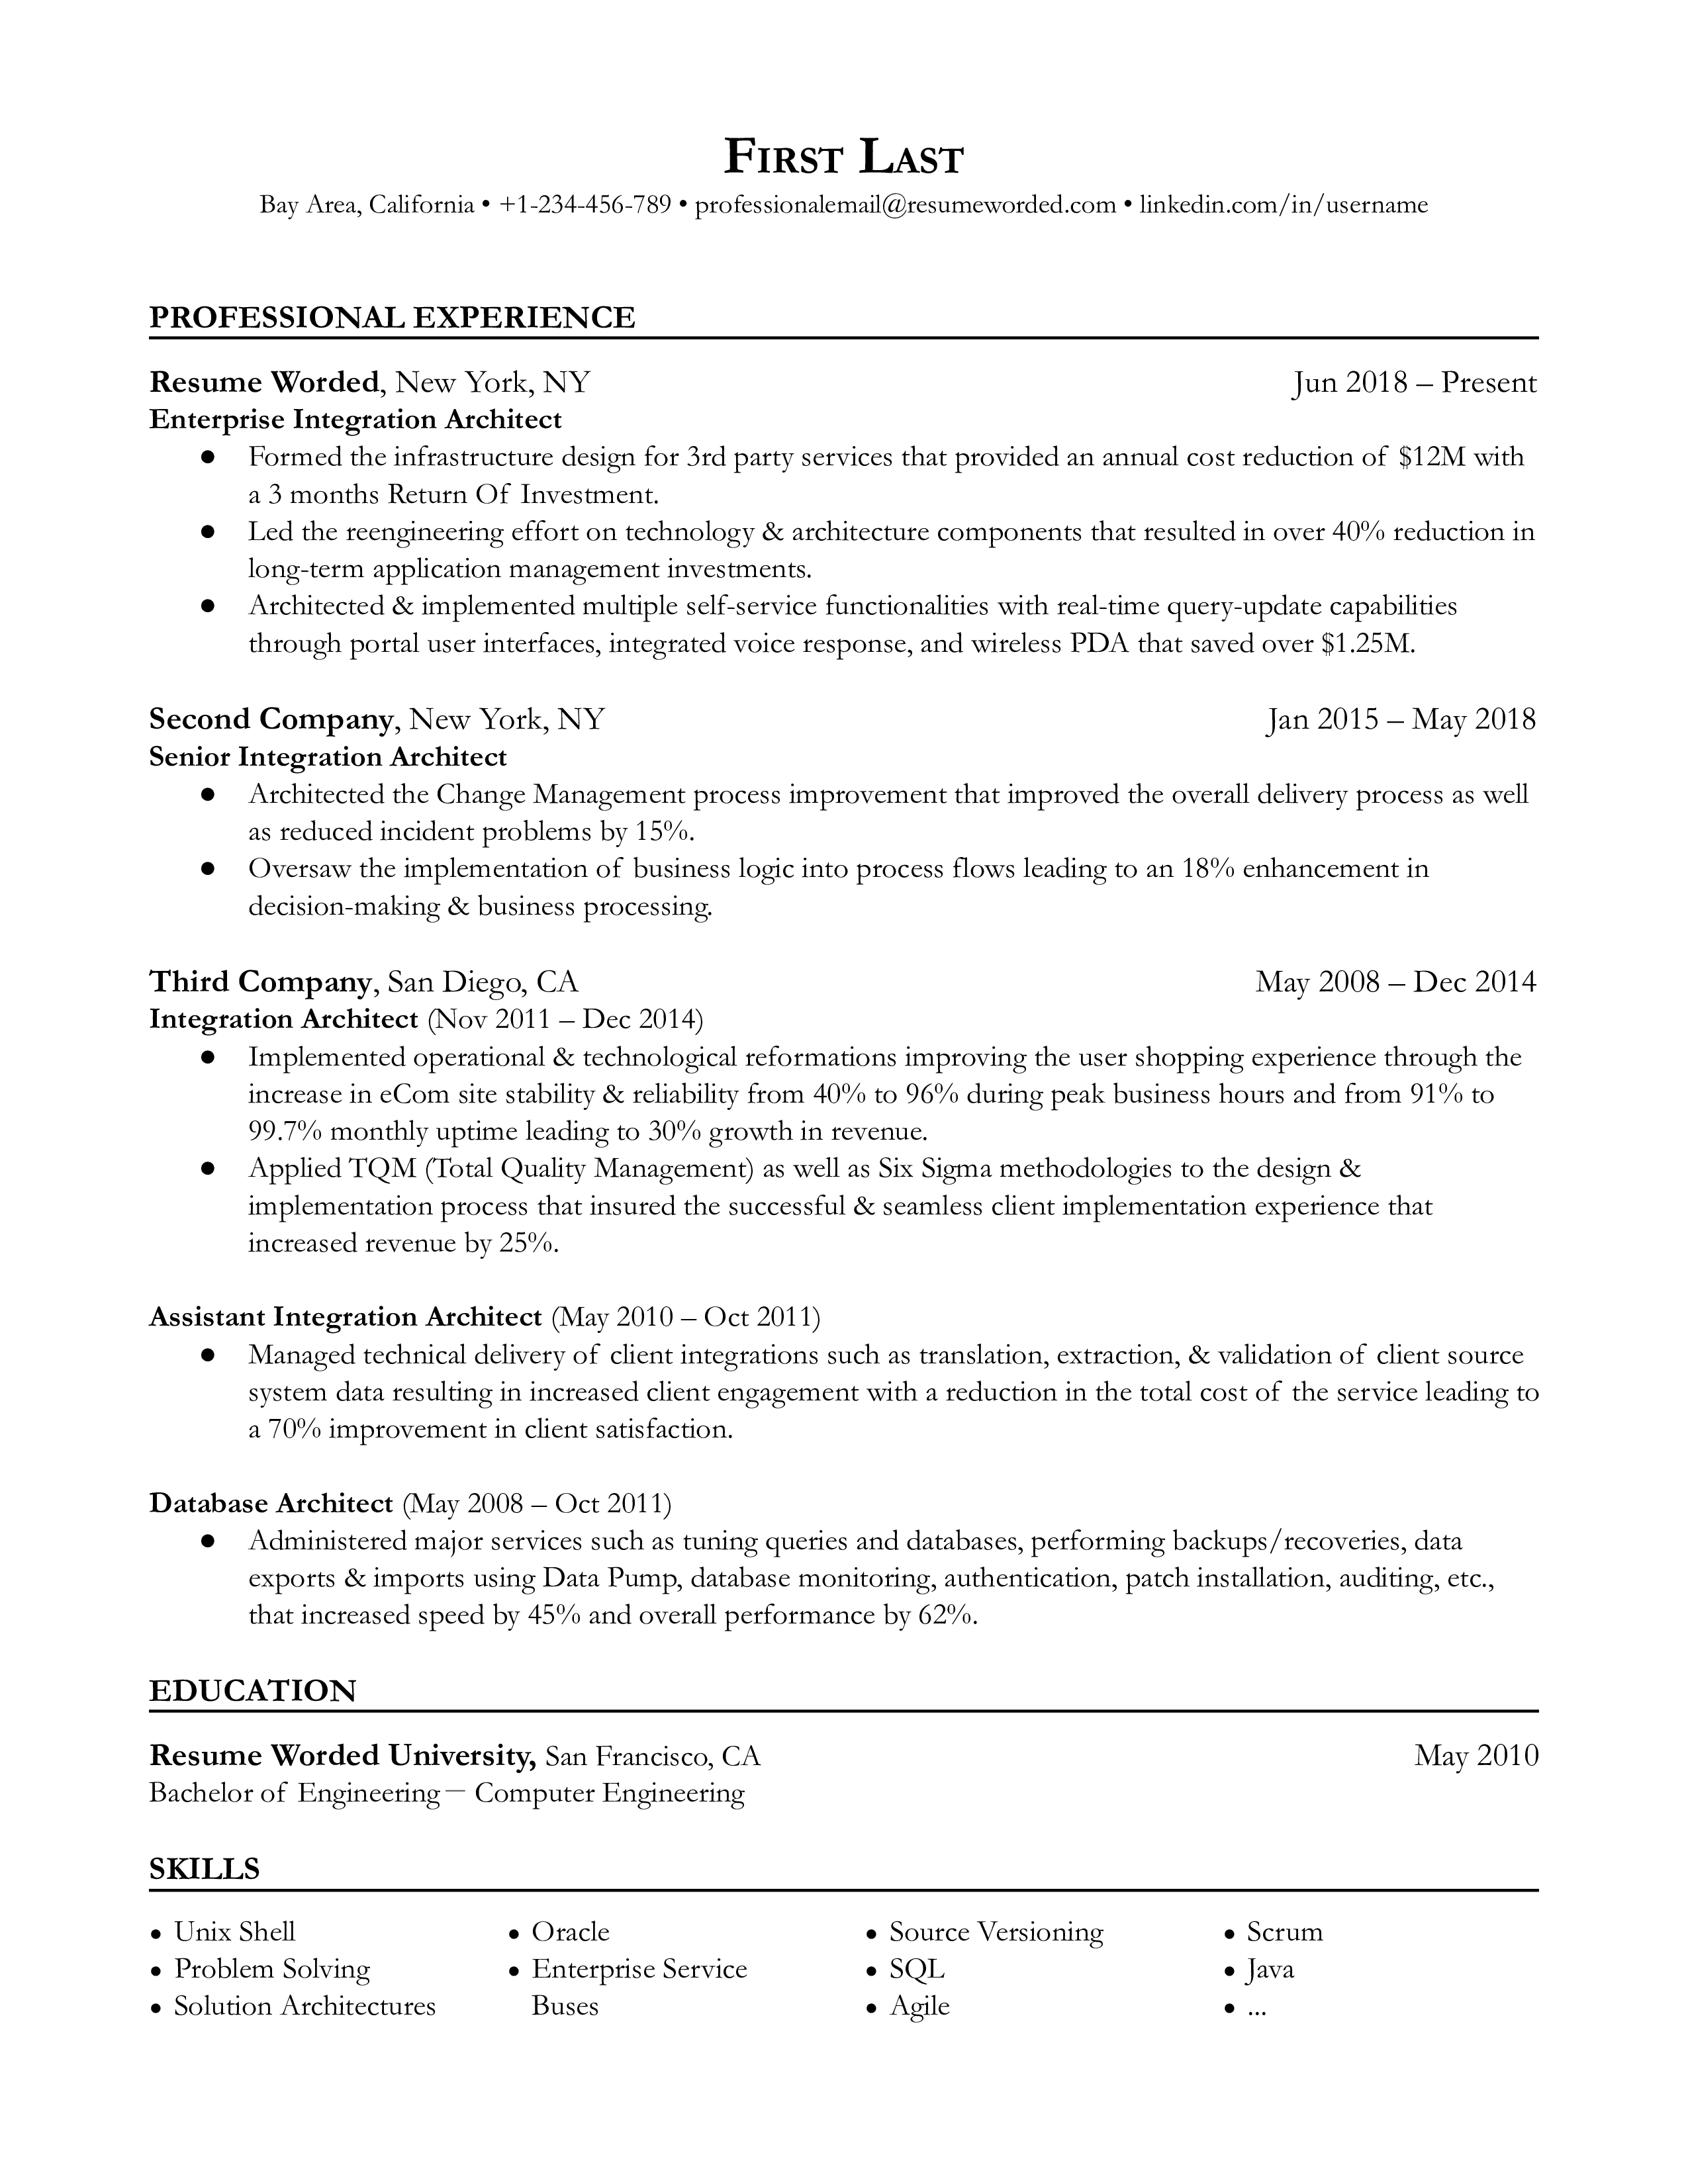 A resume template showing the experience and skills of an Enterprise Integration Architect with 10+years in the industry